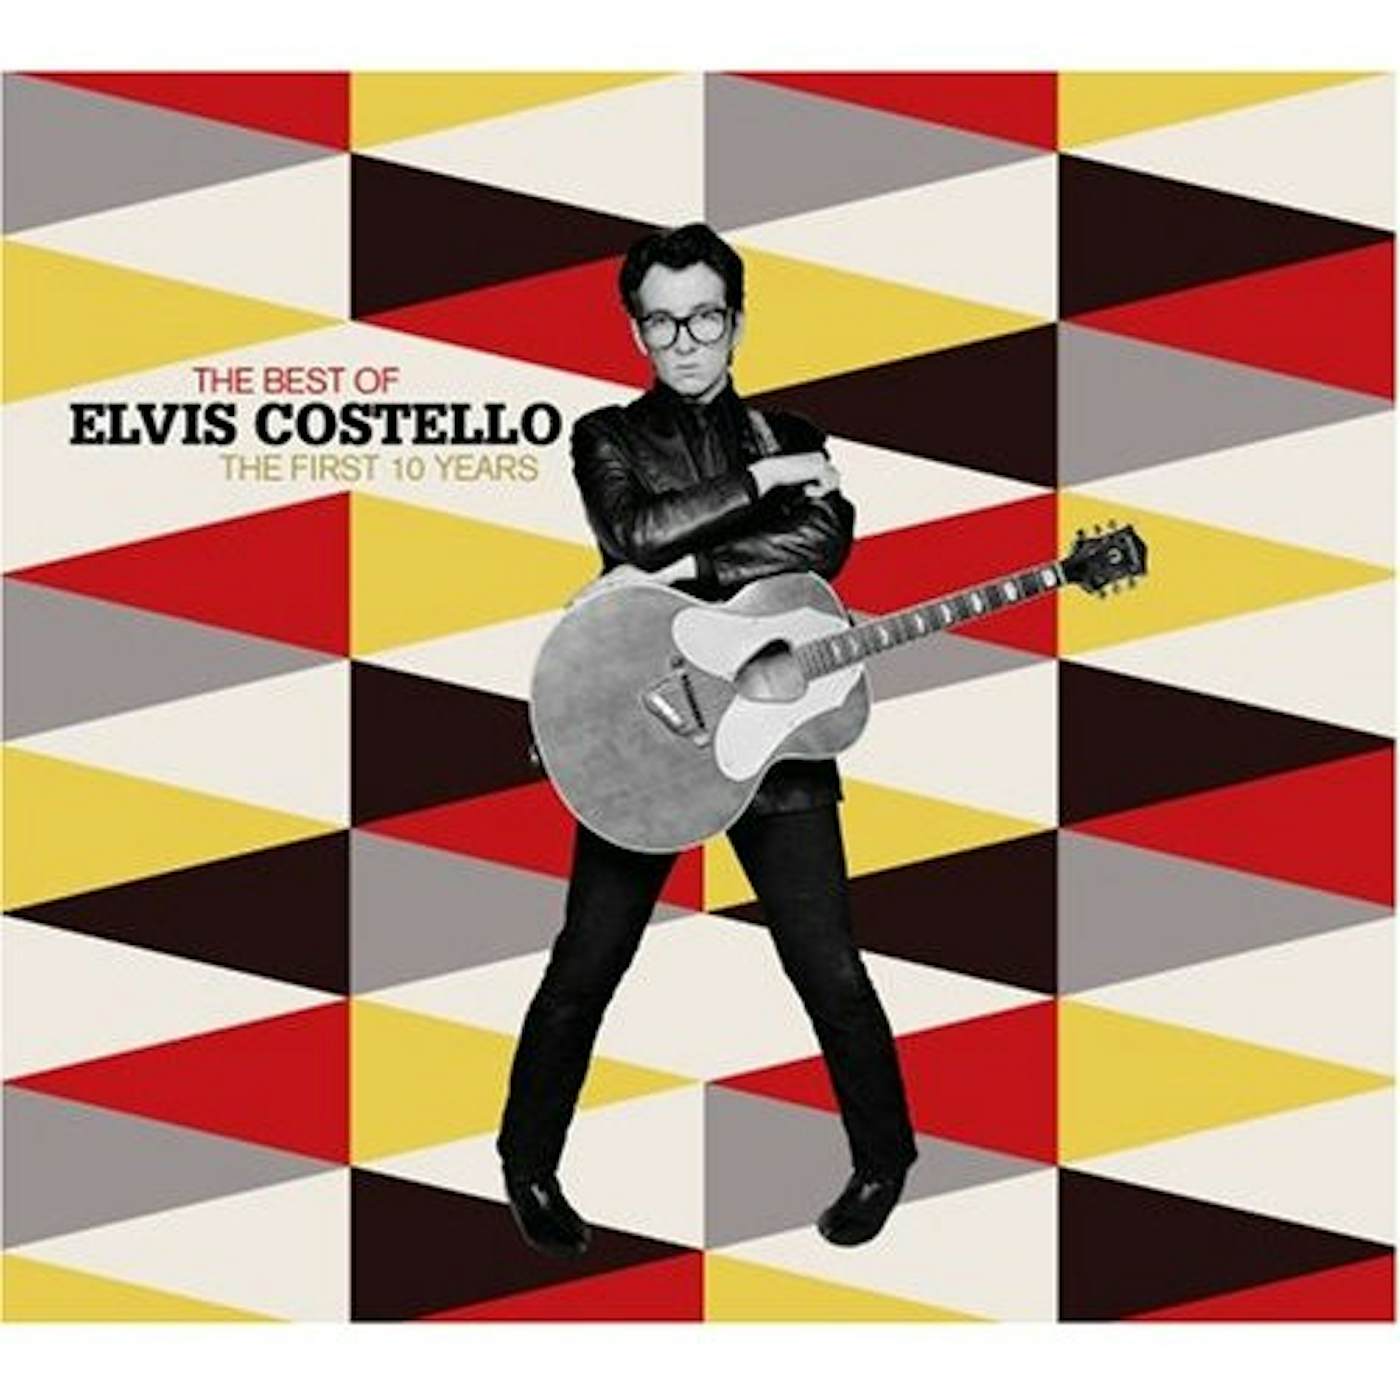 BEST OF ELVIS COSTELLO: THE FIRST 10 YEARS CD